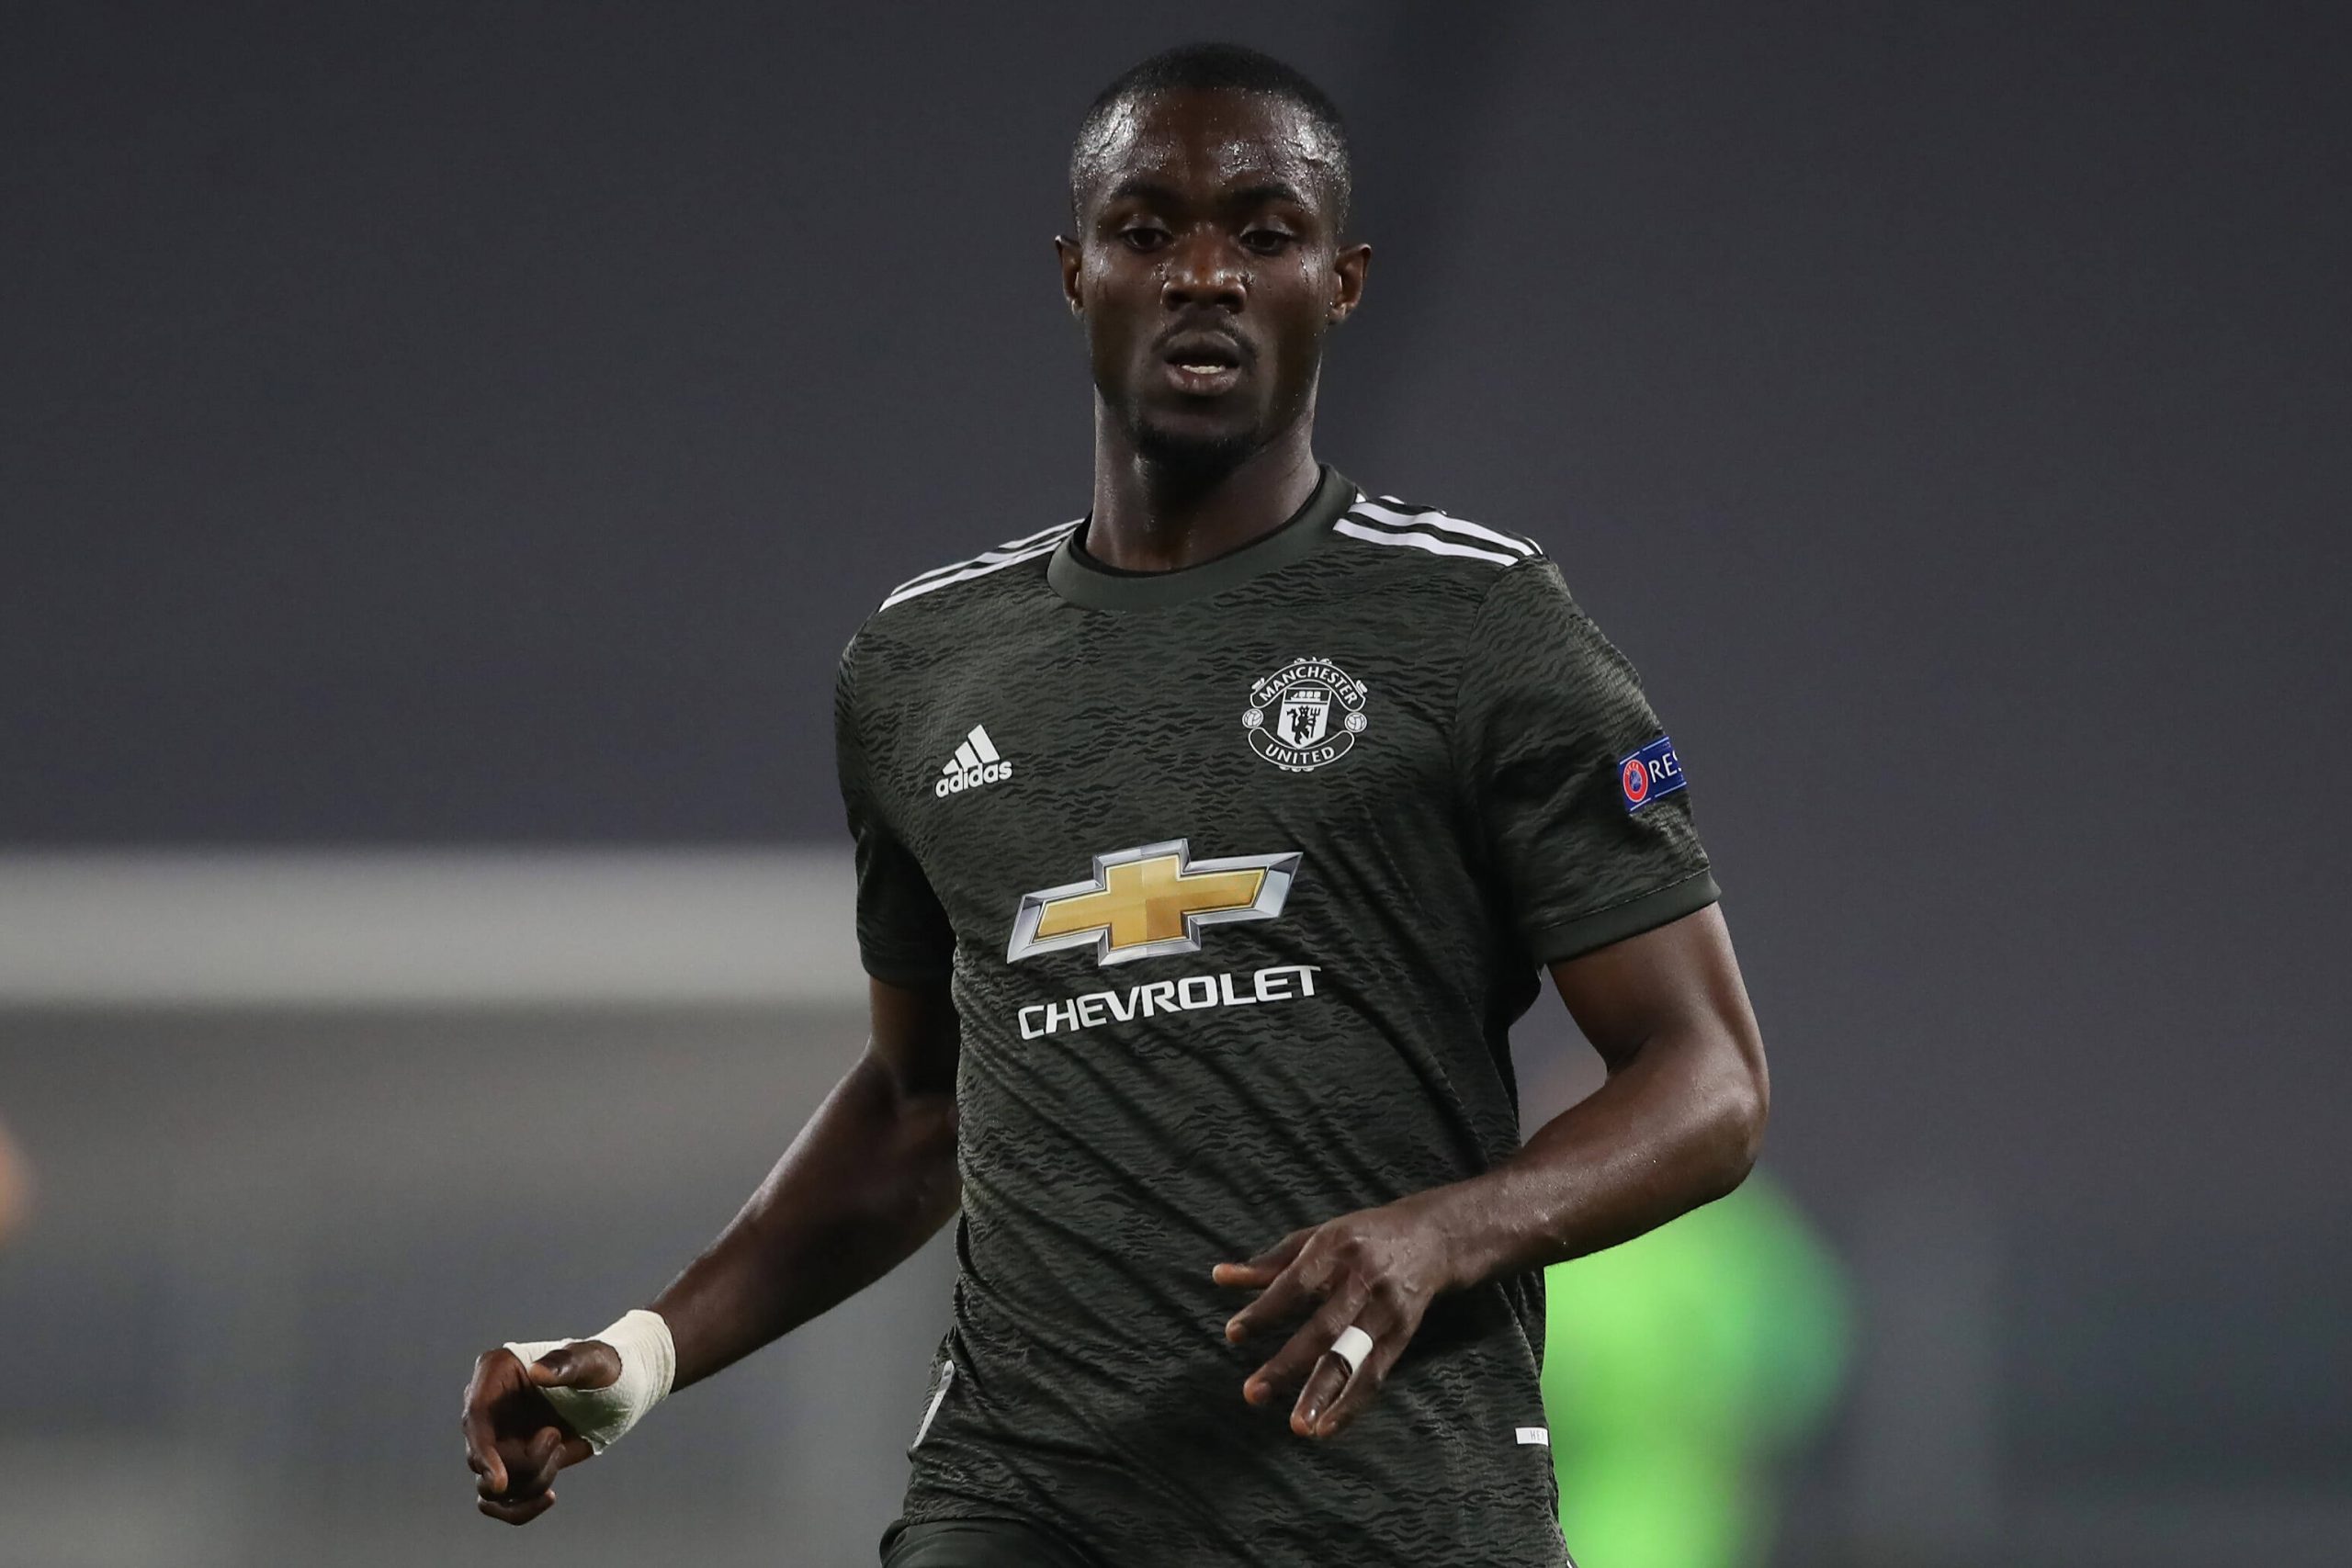 AS Roma optimistic about signing Manchester United defender Eric Bailly.